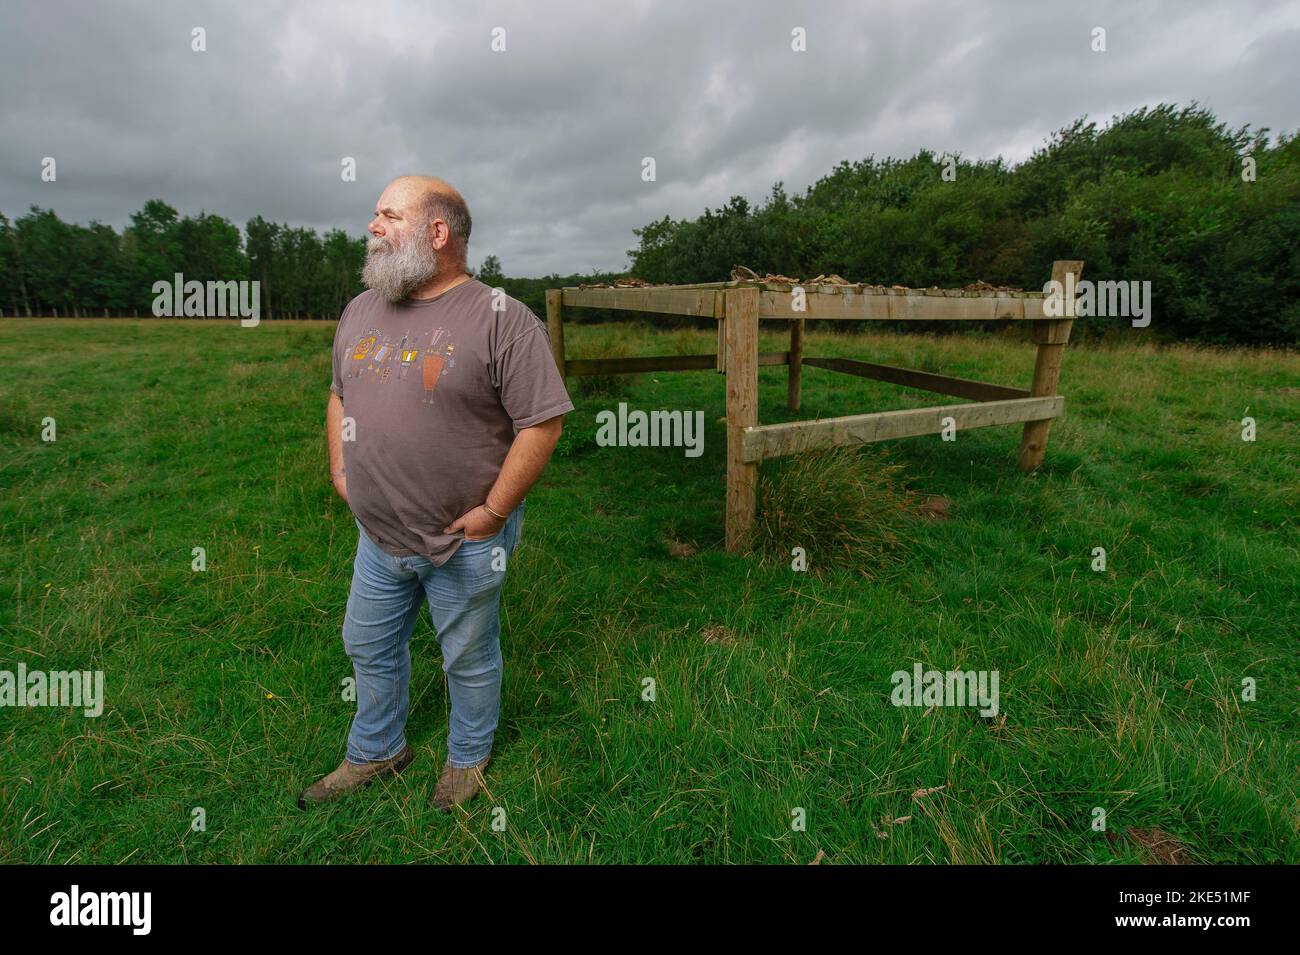 Picture By Jim Wileman - 13/08/21  Derek Gow pictured with a sky table, at Upcott Grange Farm, Broadwoodwidger, Devon. Stock Photo